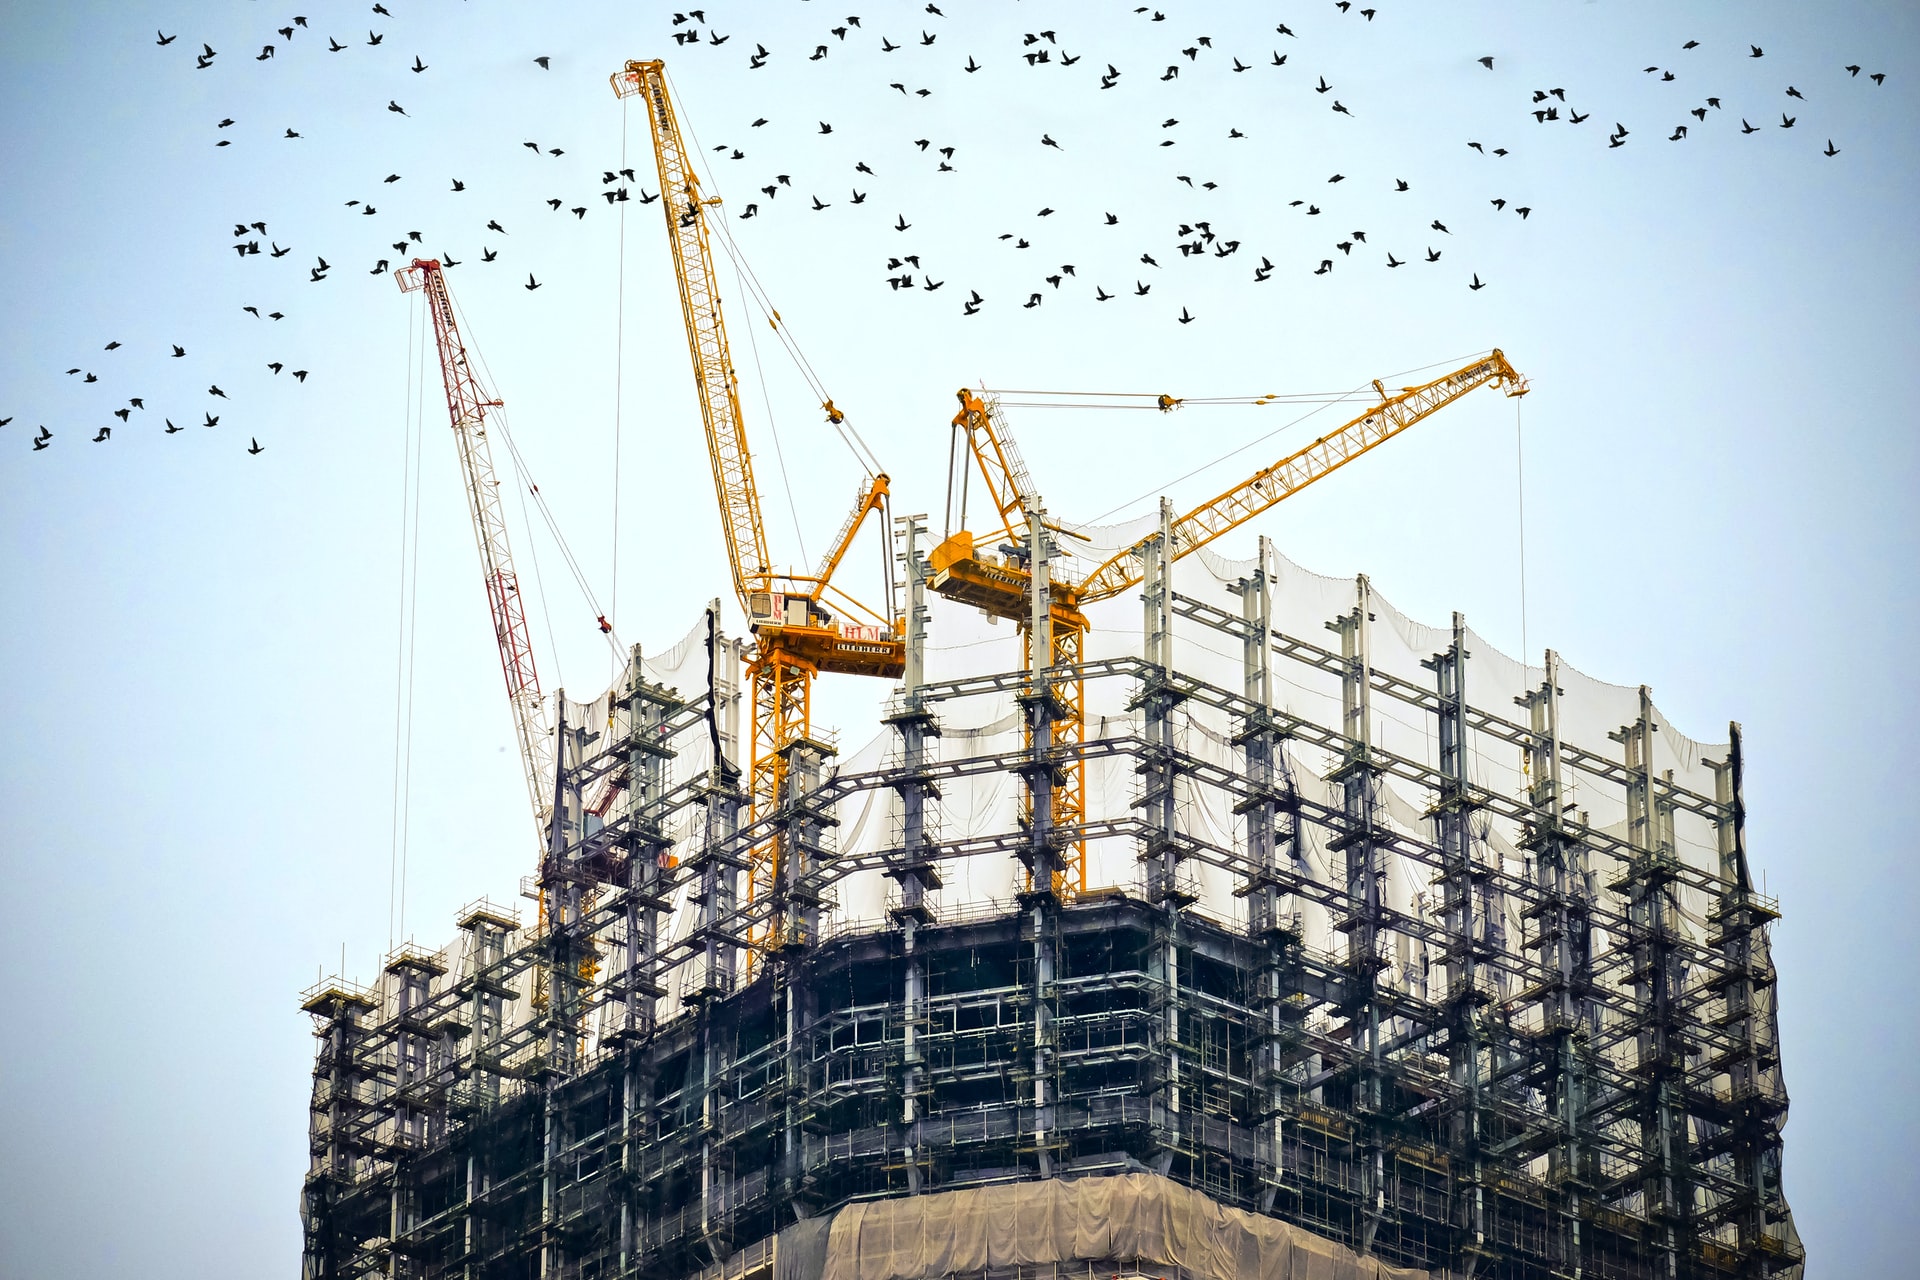 Image of a building being assembled by a series of cranes.